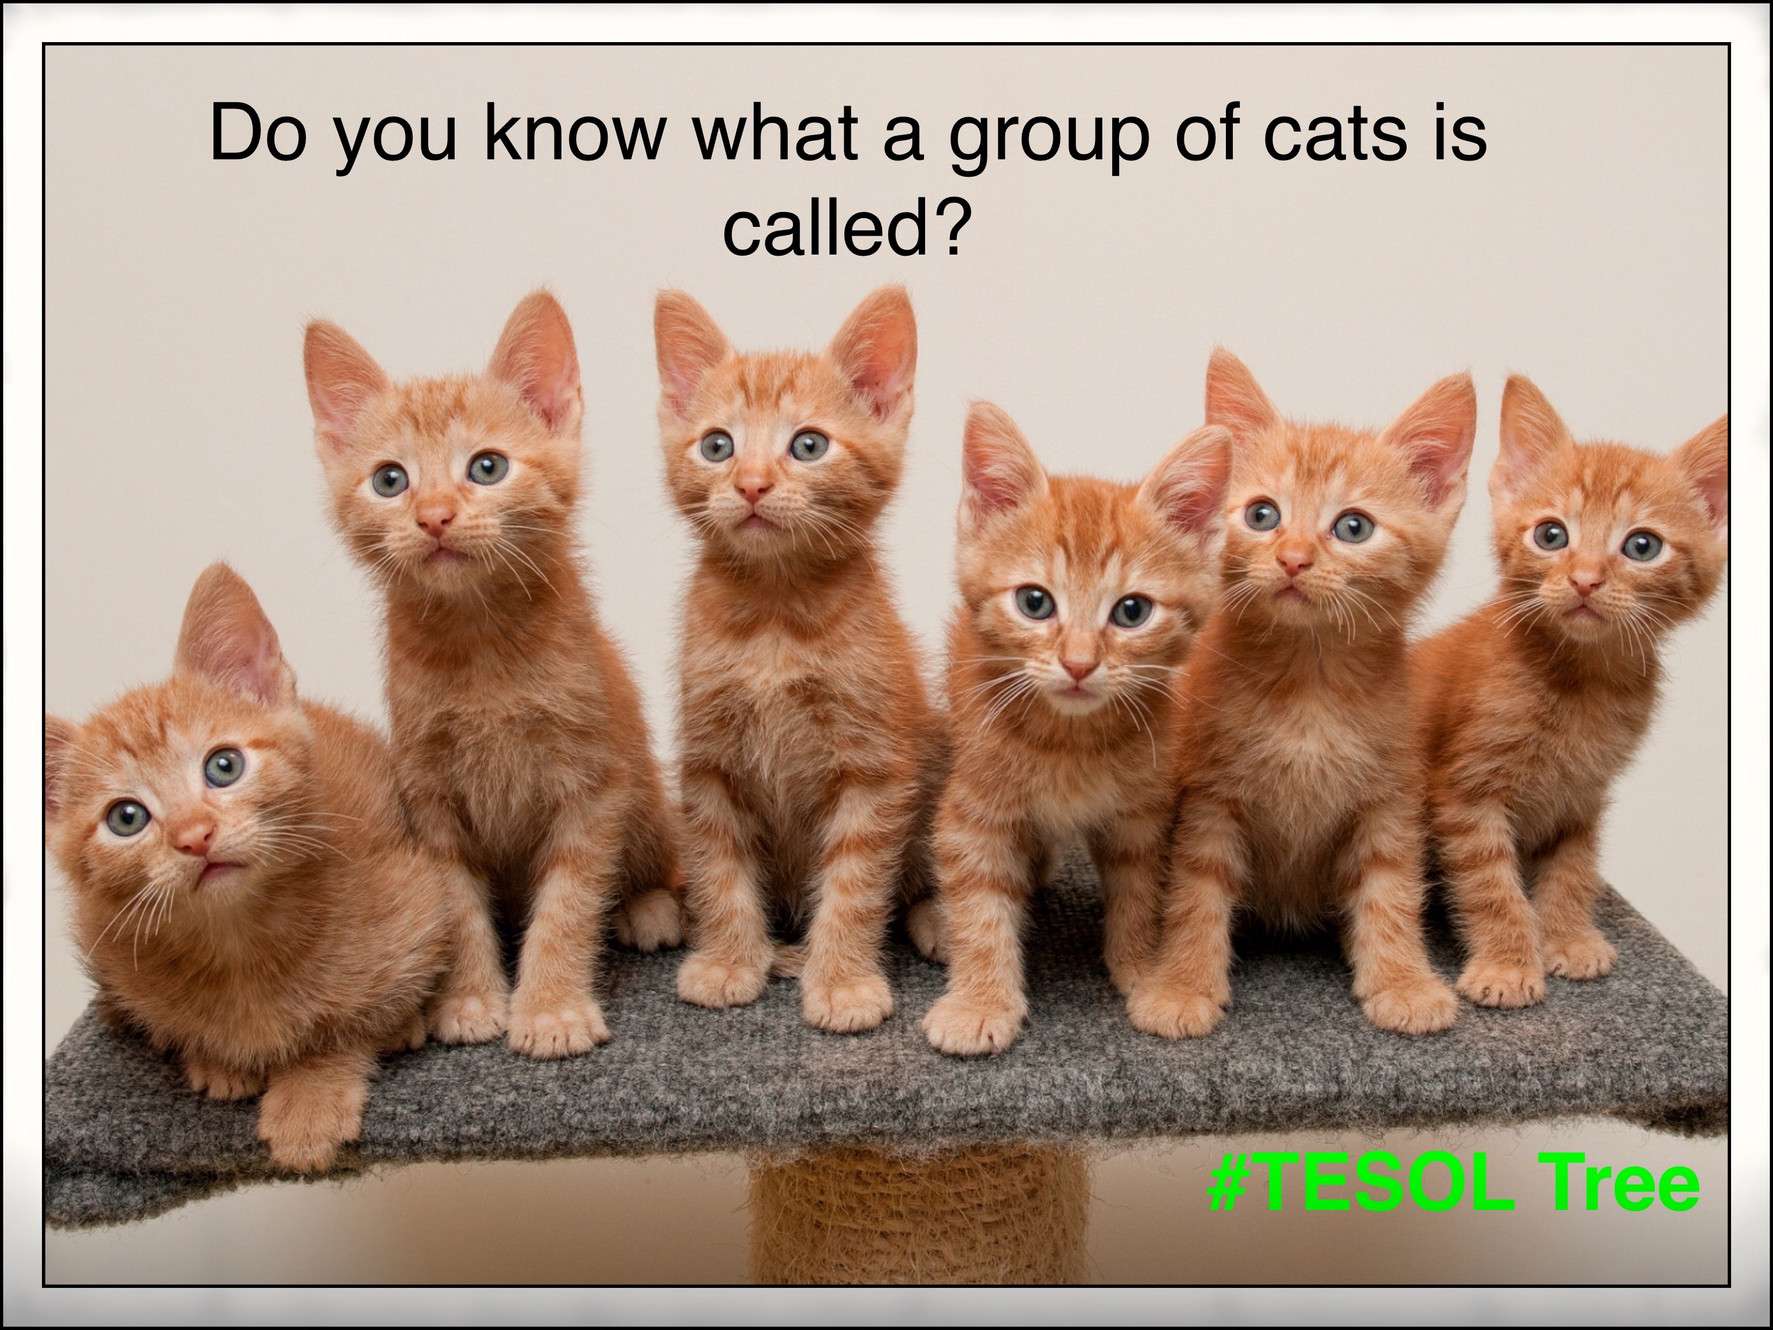 What is a group of cats called?